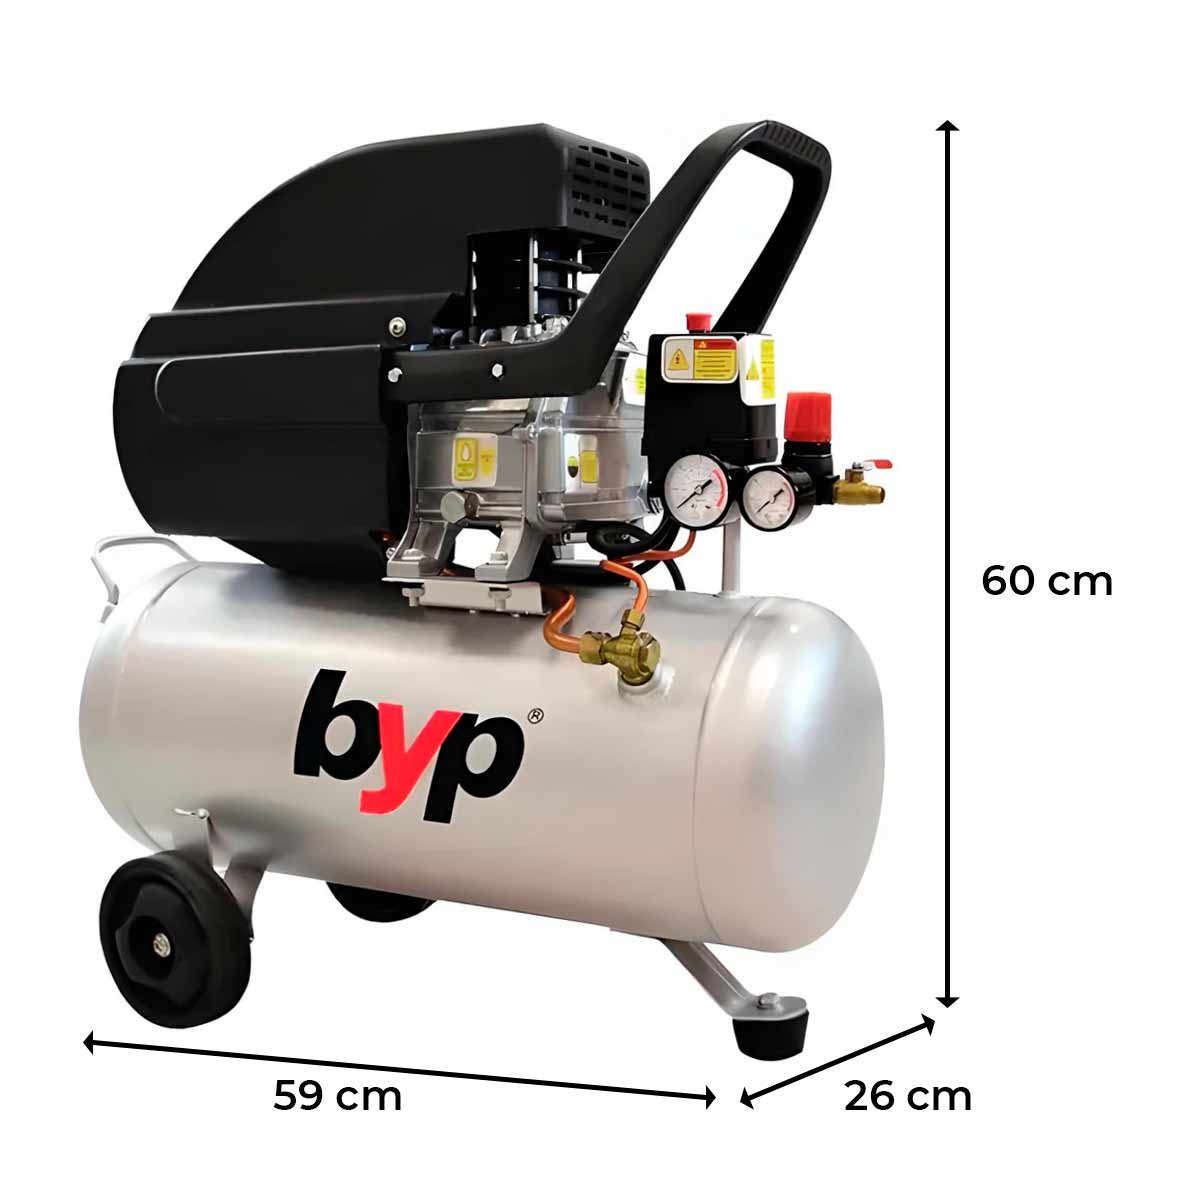 Compresor 2.5Hp 25 Galones 120 Psi 206 L/min Profesional Byp